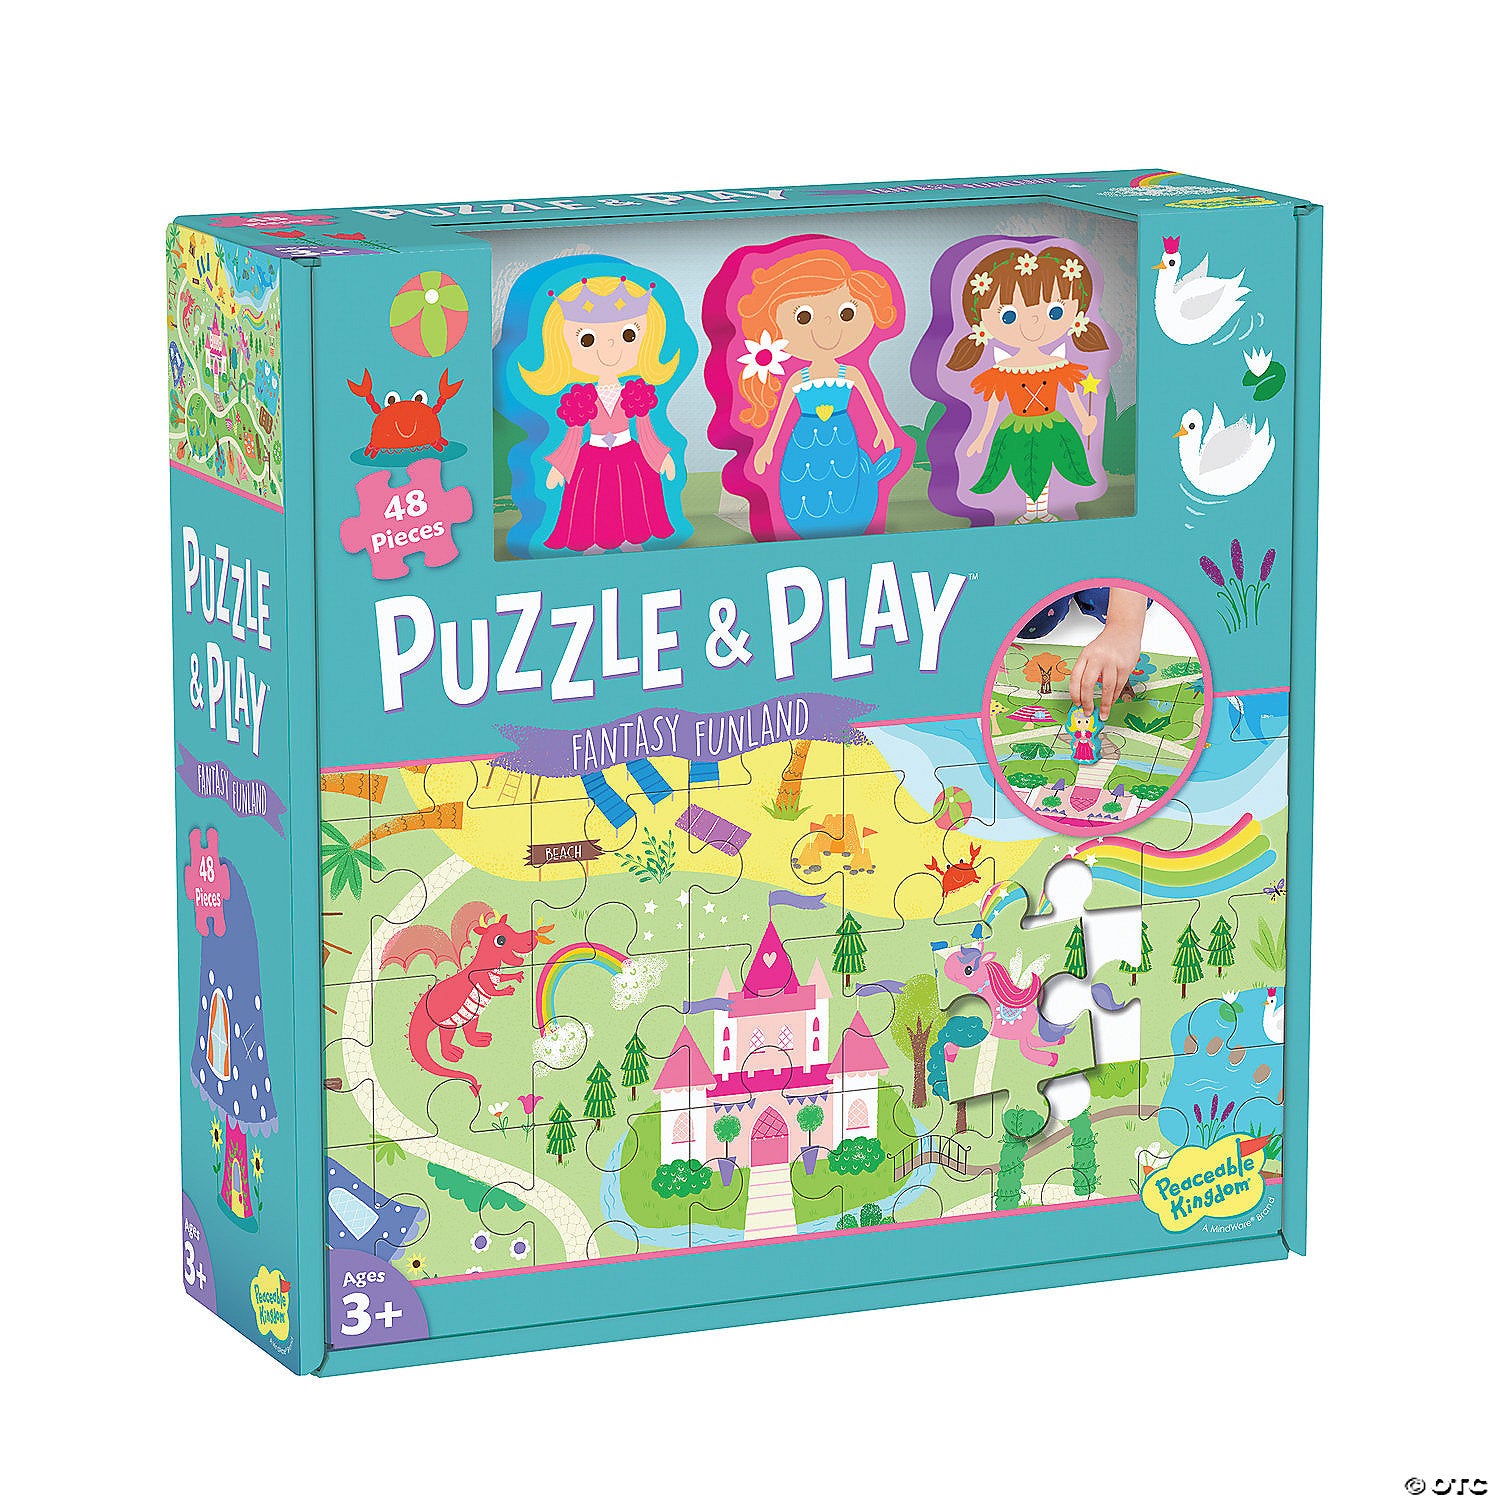 Puzzle and Play Fantasy